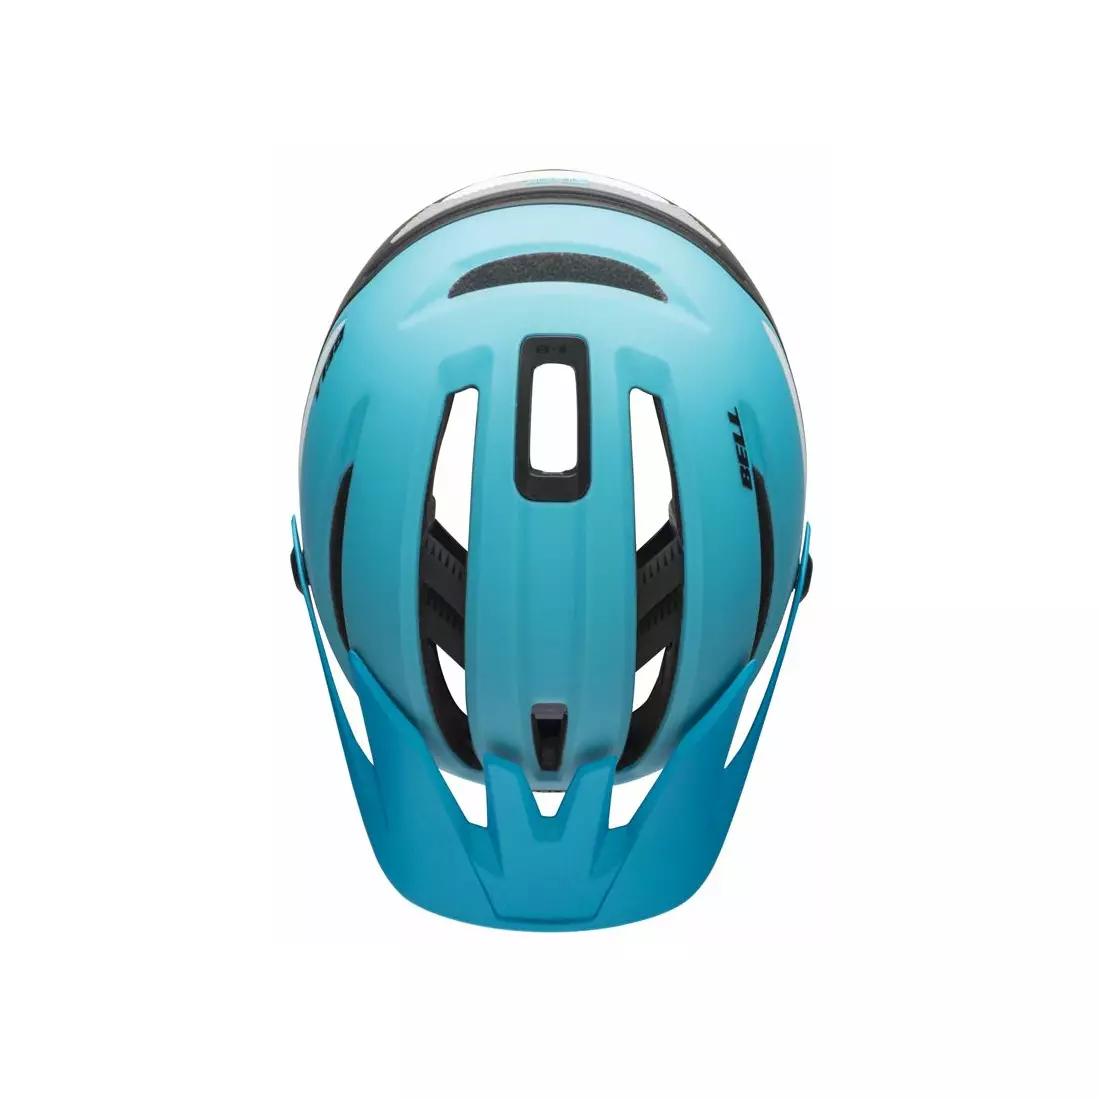 BELL kask rowerowy mtb SIXER INTEGRATED MIPS, rigeline matte blue black 